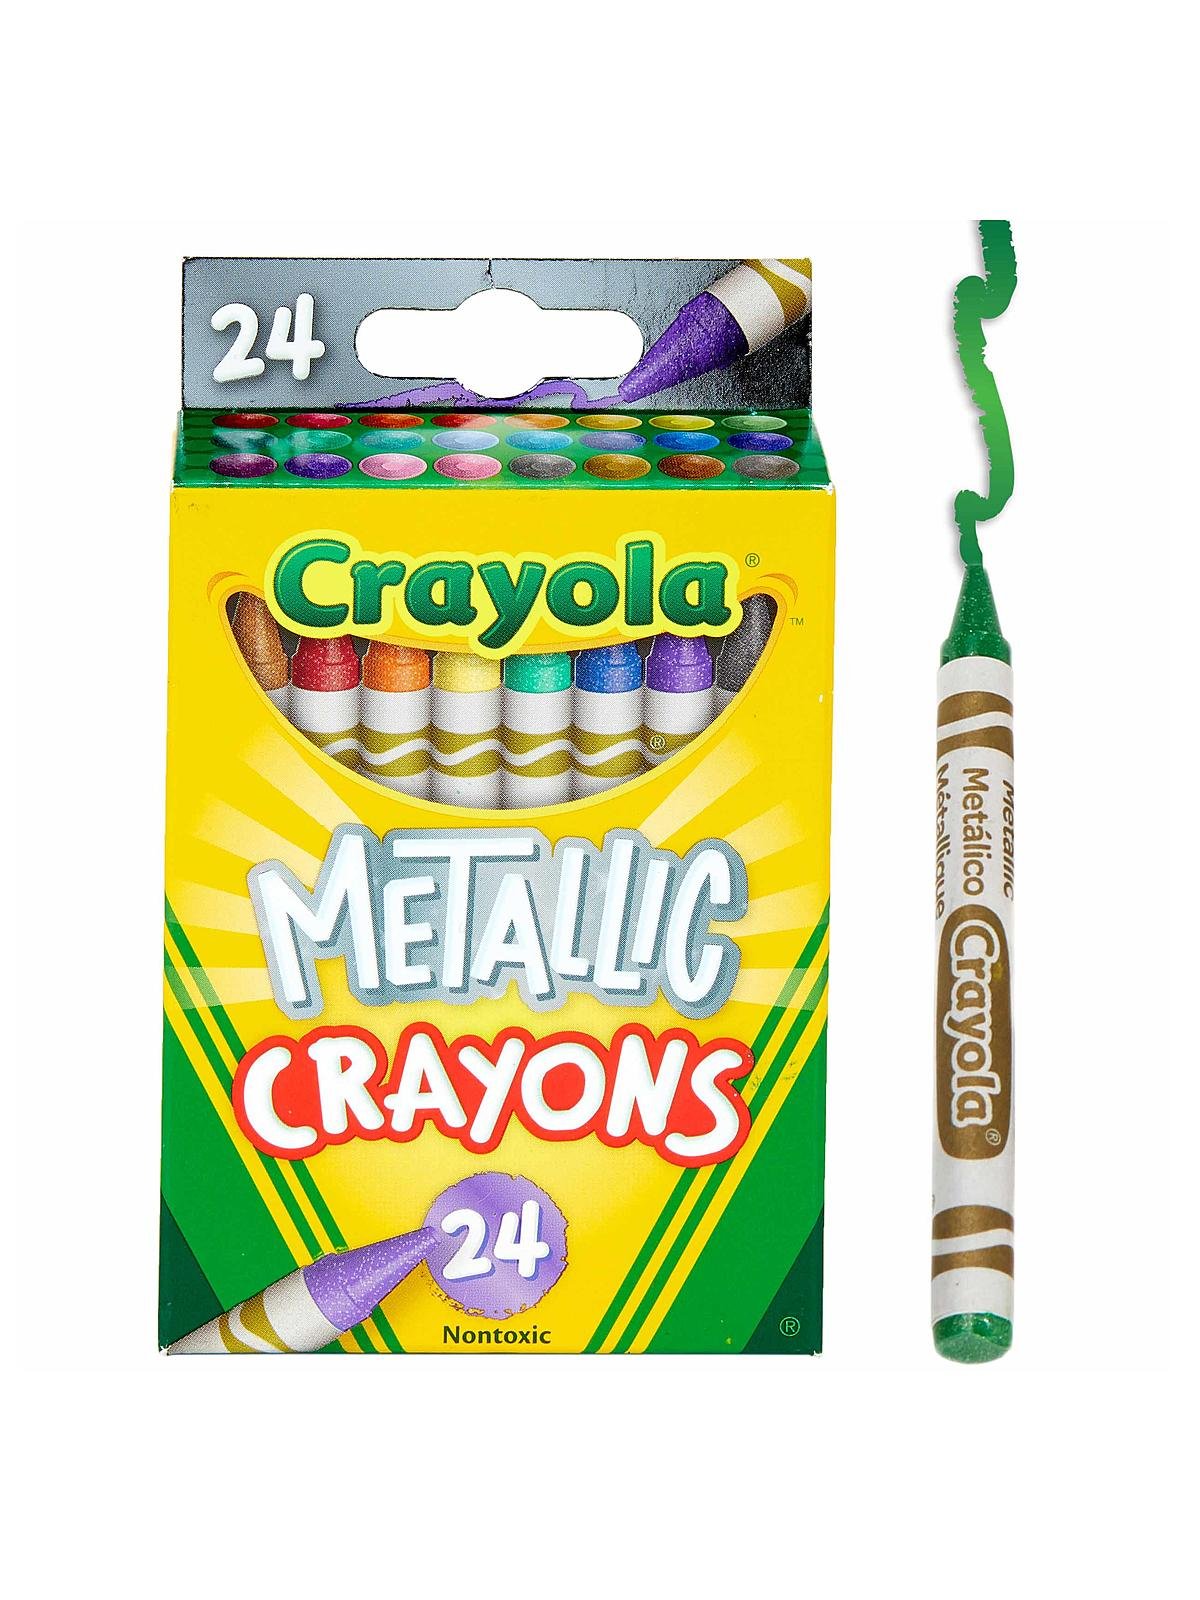 Pack of 24